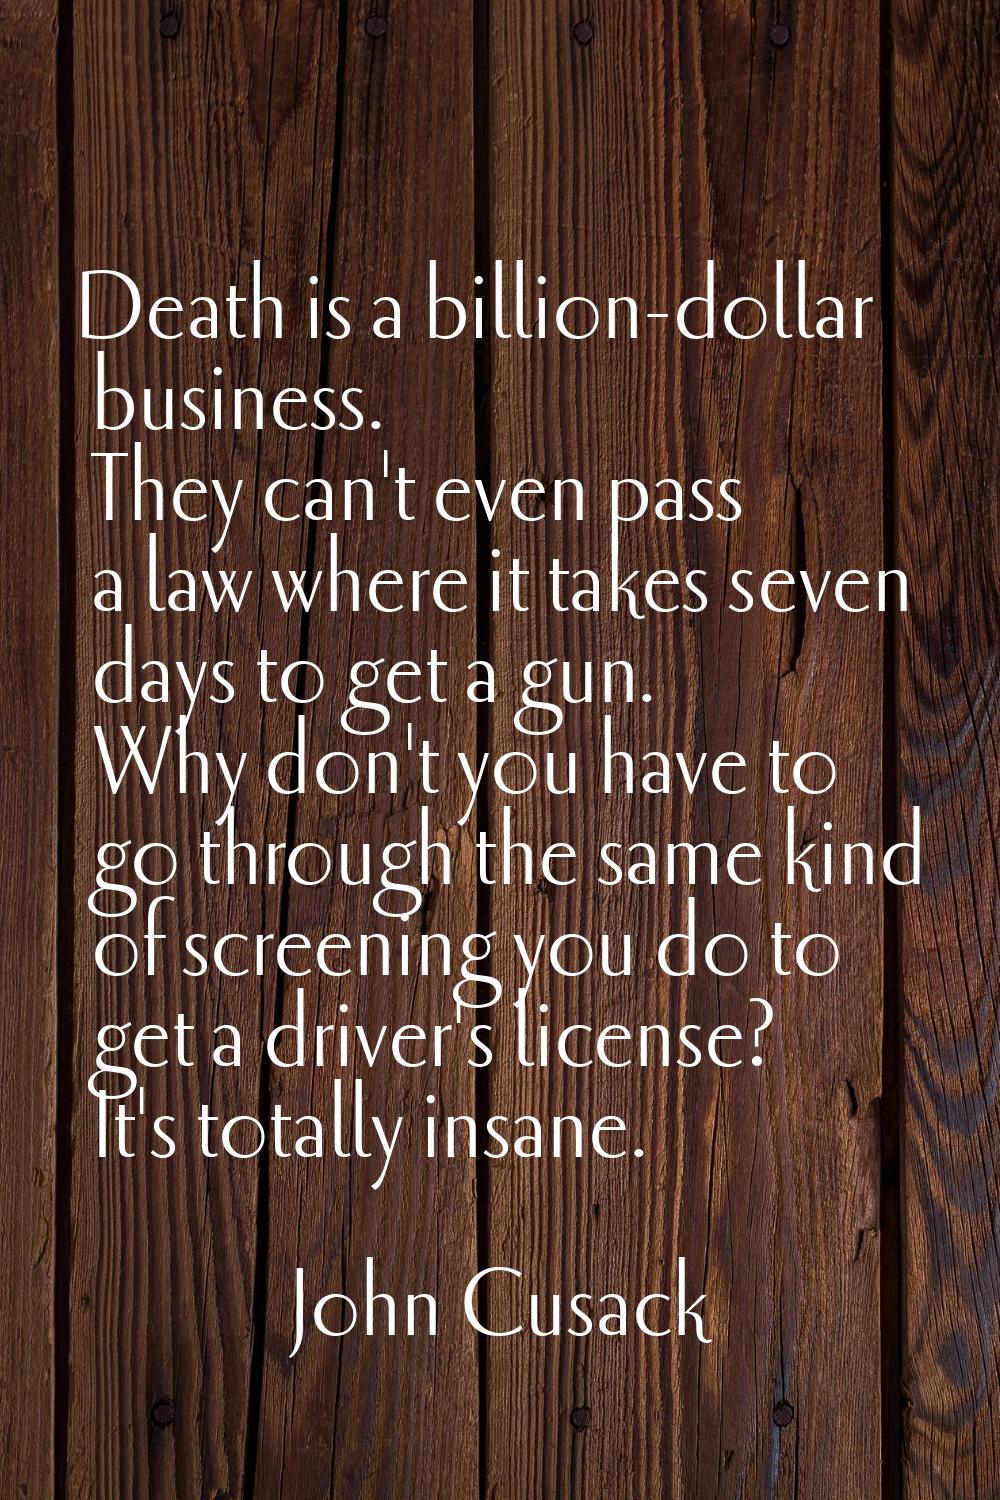 Death is a billion-dollar business. They can't even pass a law where it takes seven days to get a g